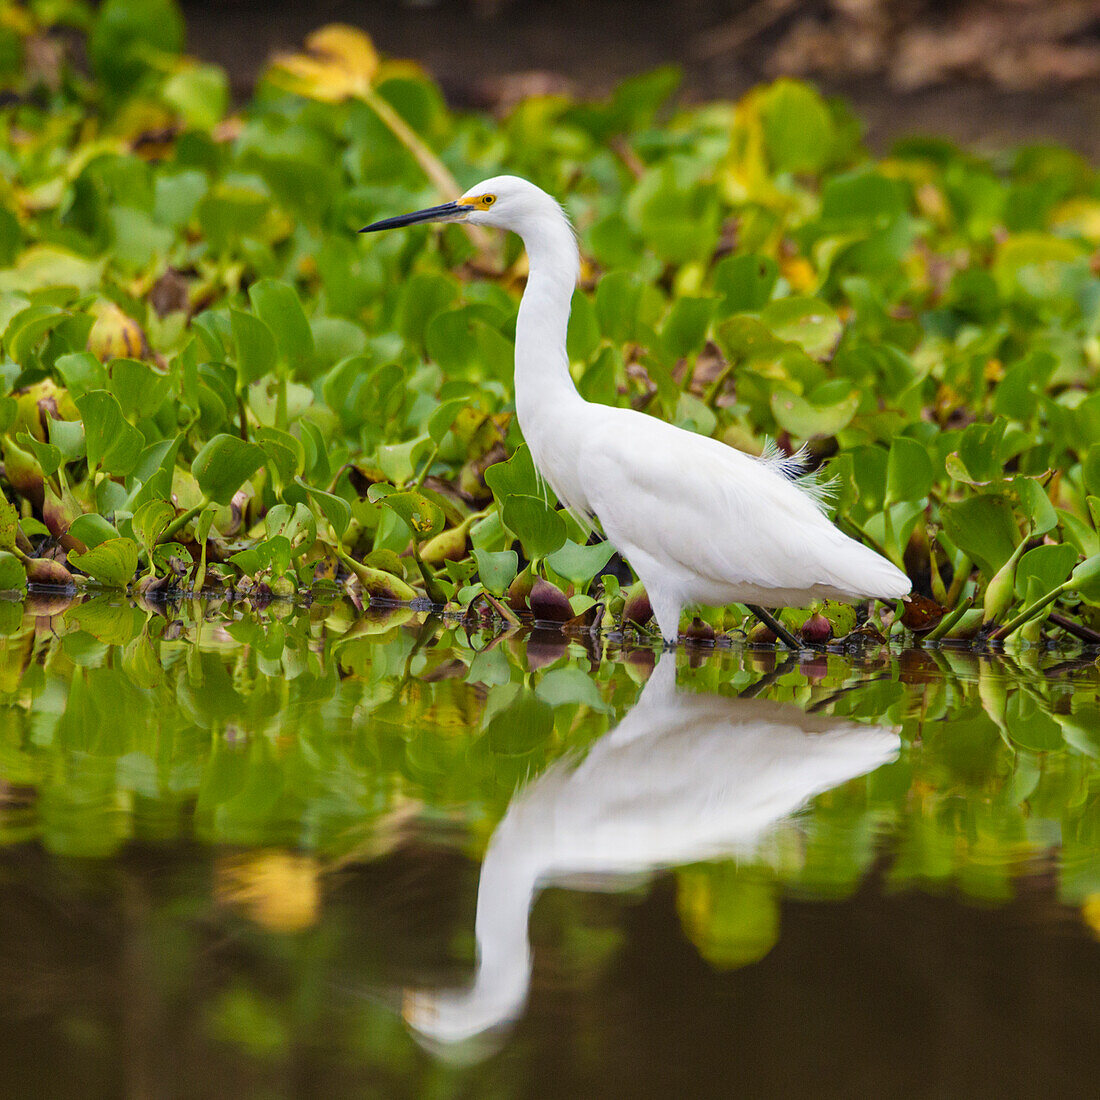 Brazil. A Snowy egret (Egretta Thula), is commonly found in the Pantanal, the world's largest tropical wetland area, UNESCO World Heritage Site.